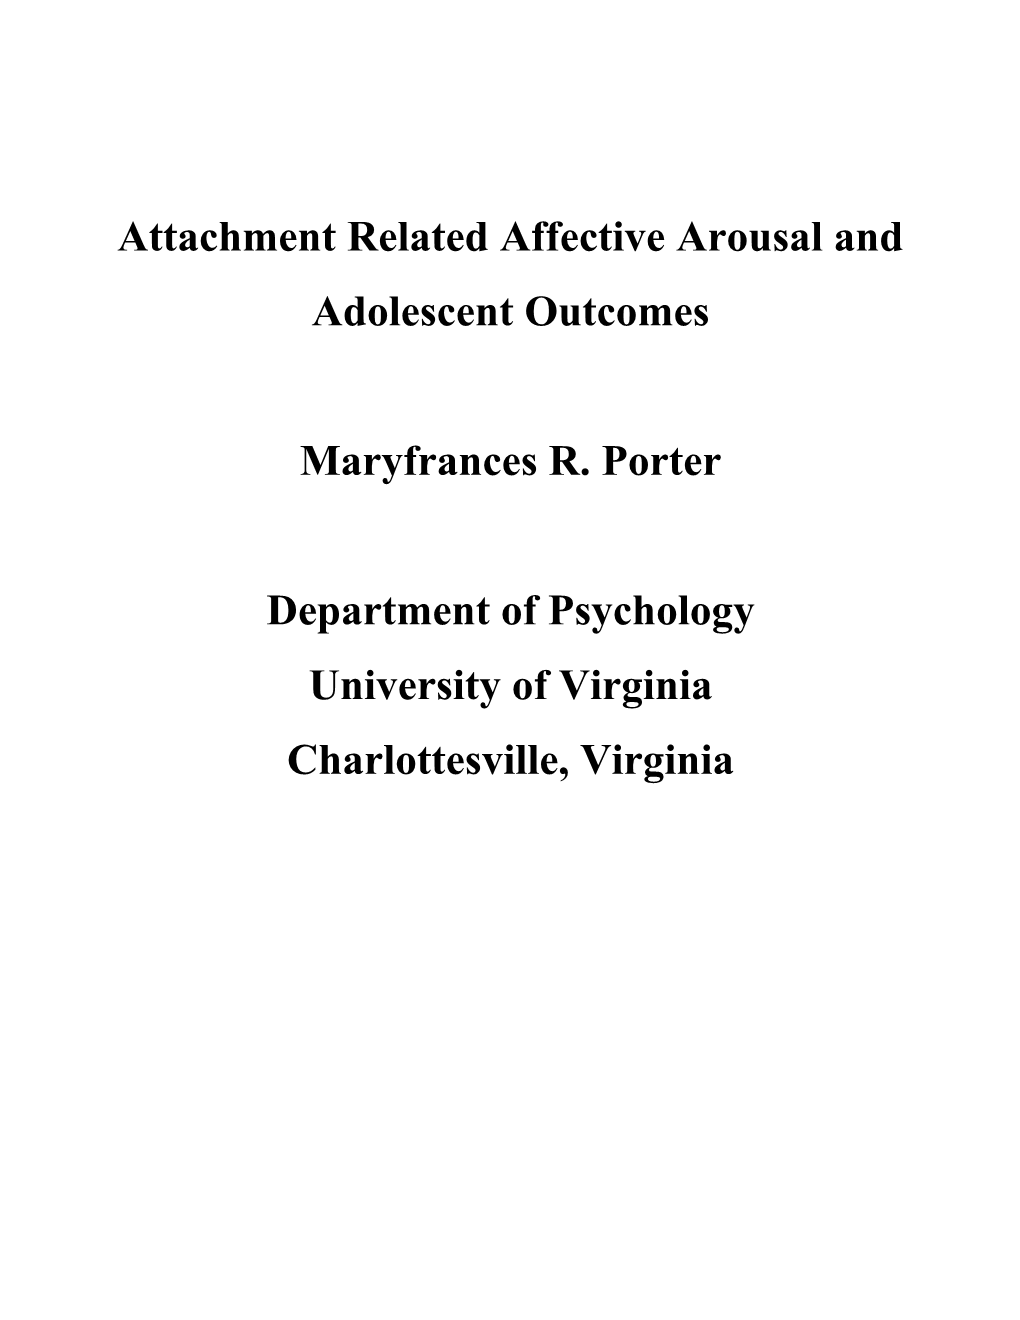 Attachment Related Affective Arousal and Adolescent Outcomes